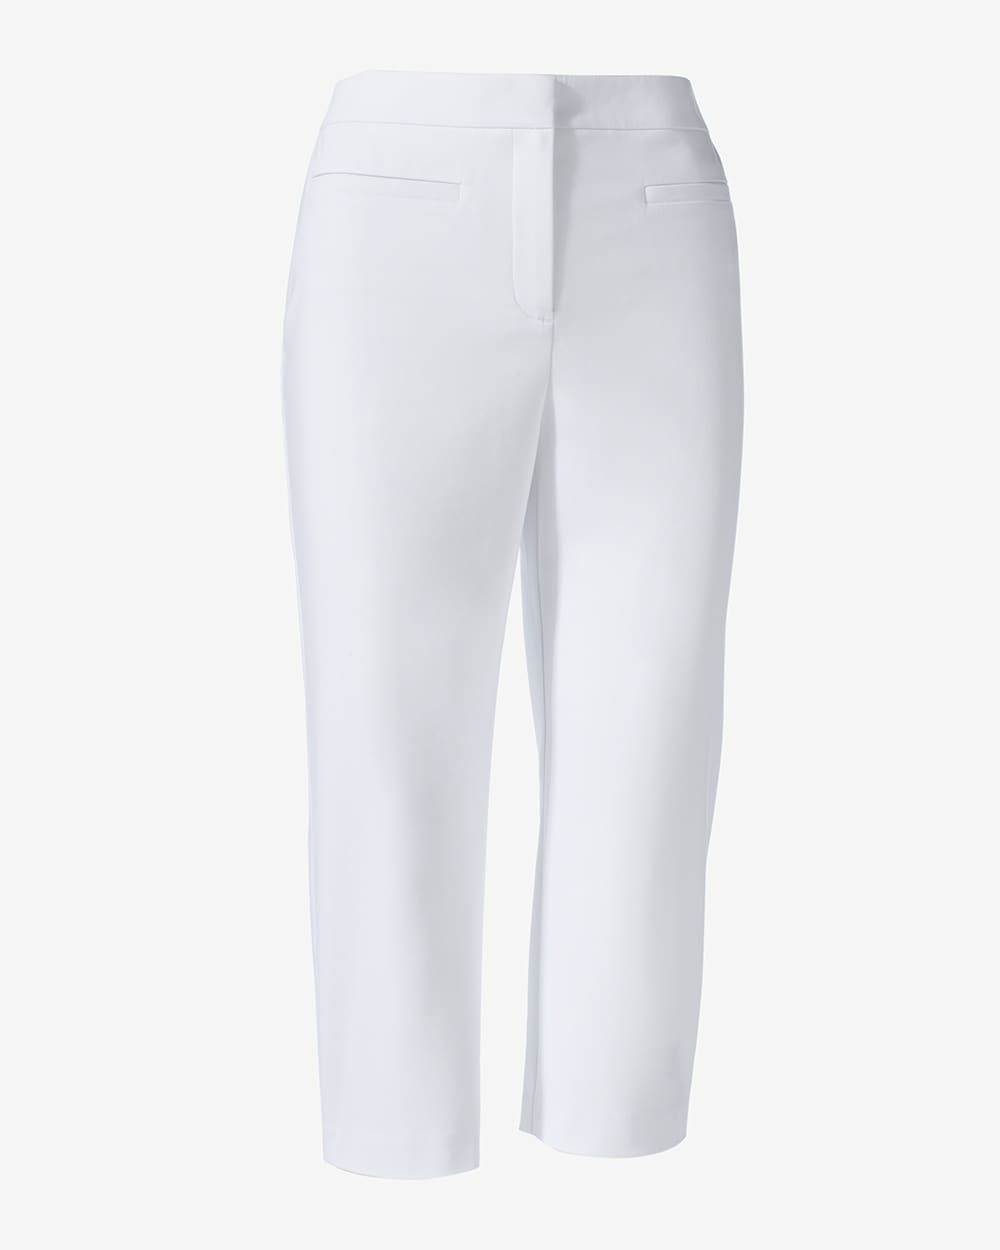 Fabulously Slimming Darcy Crop Pants